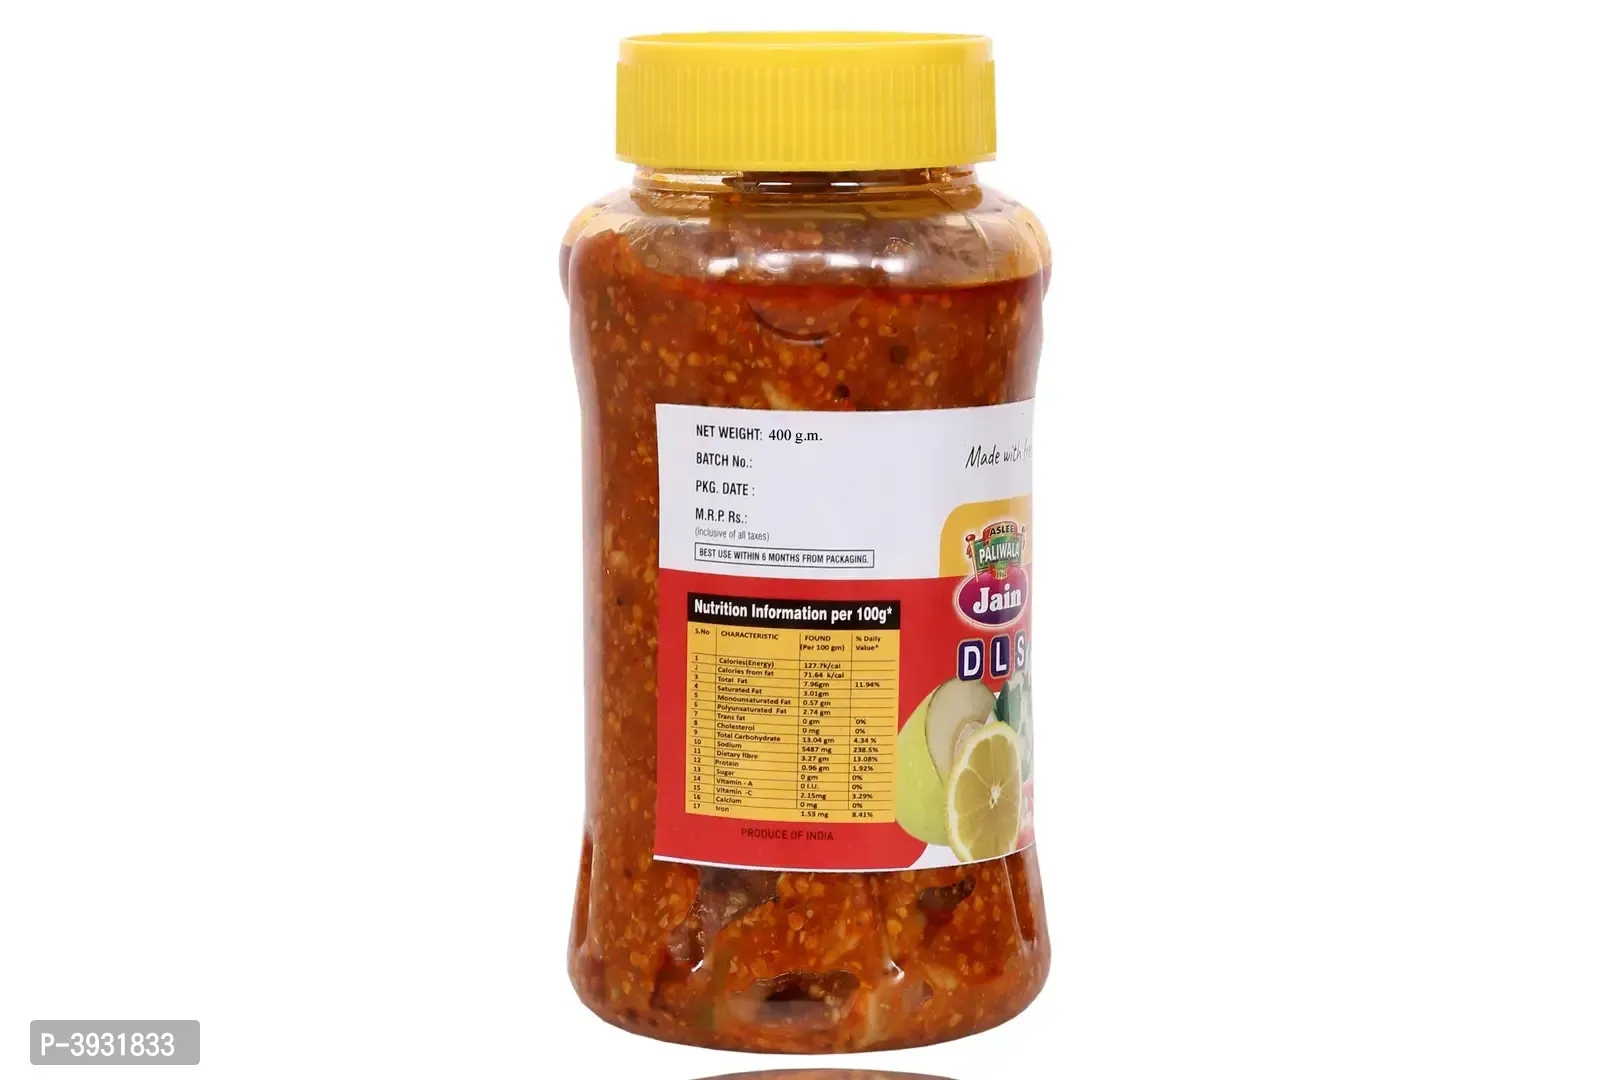 Mixed Pickle (Mixed Achaar) 400 gm - 400 Gms